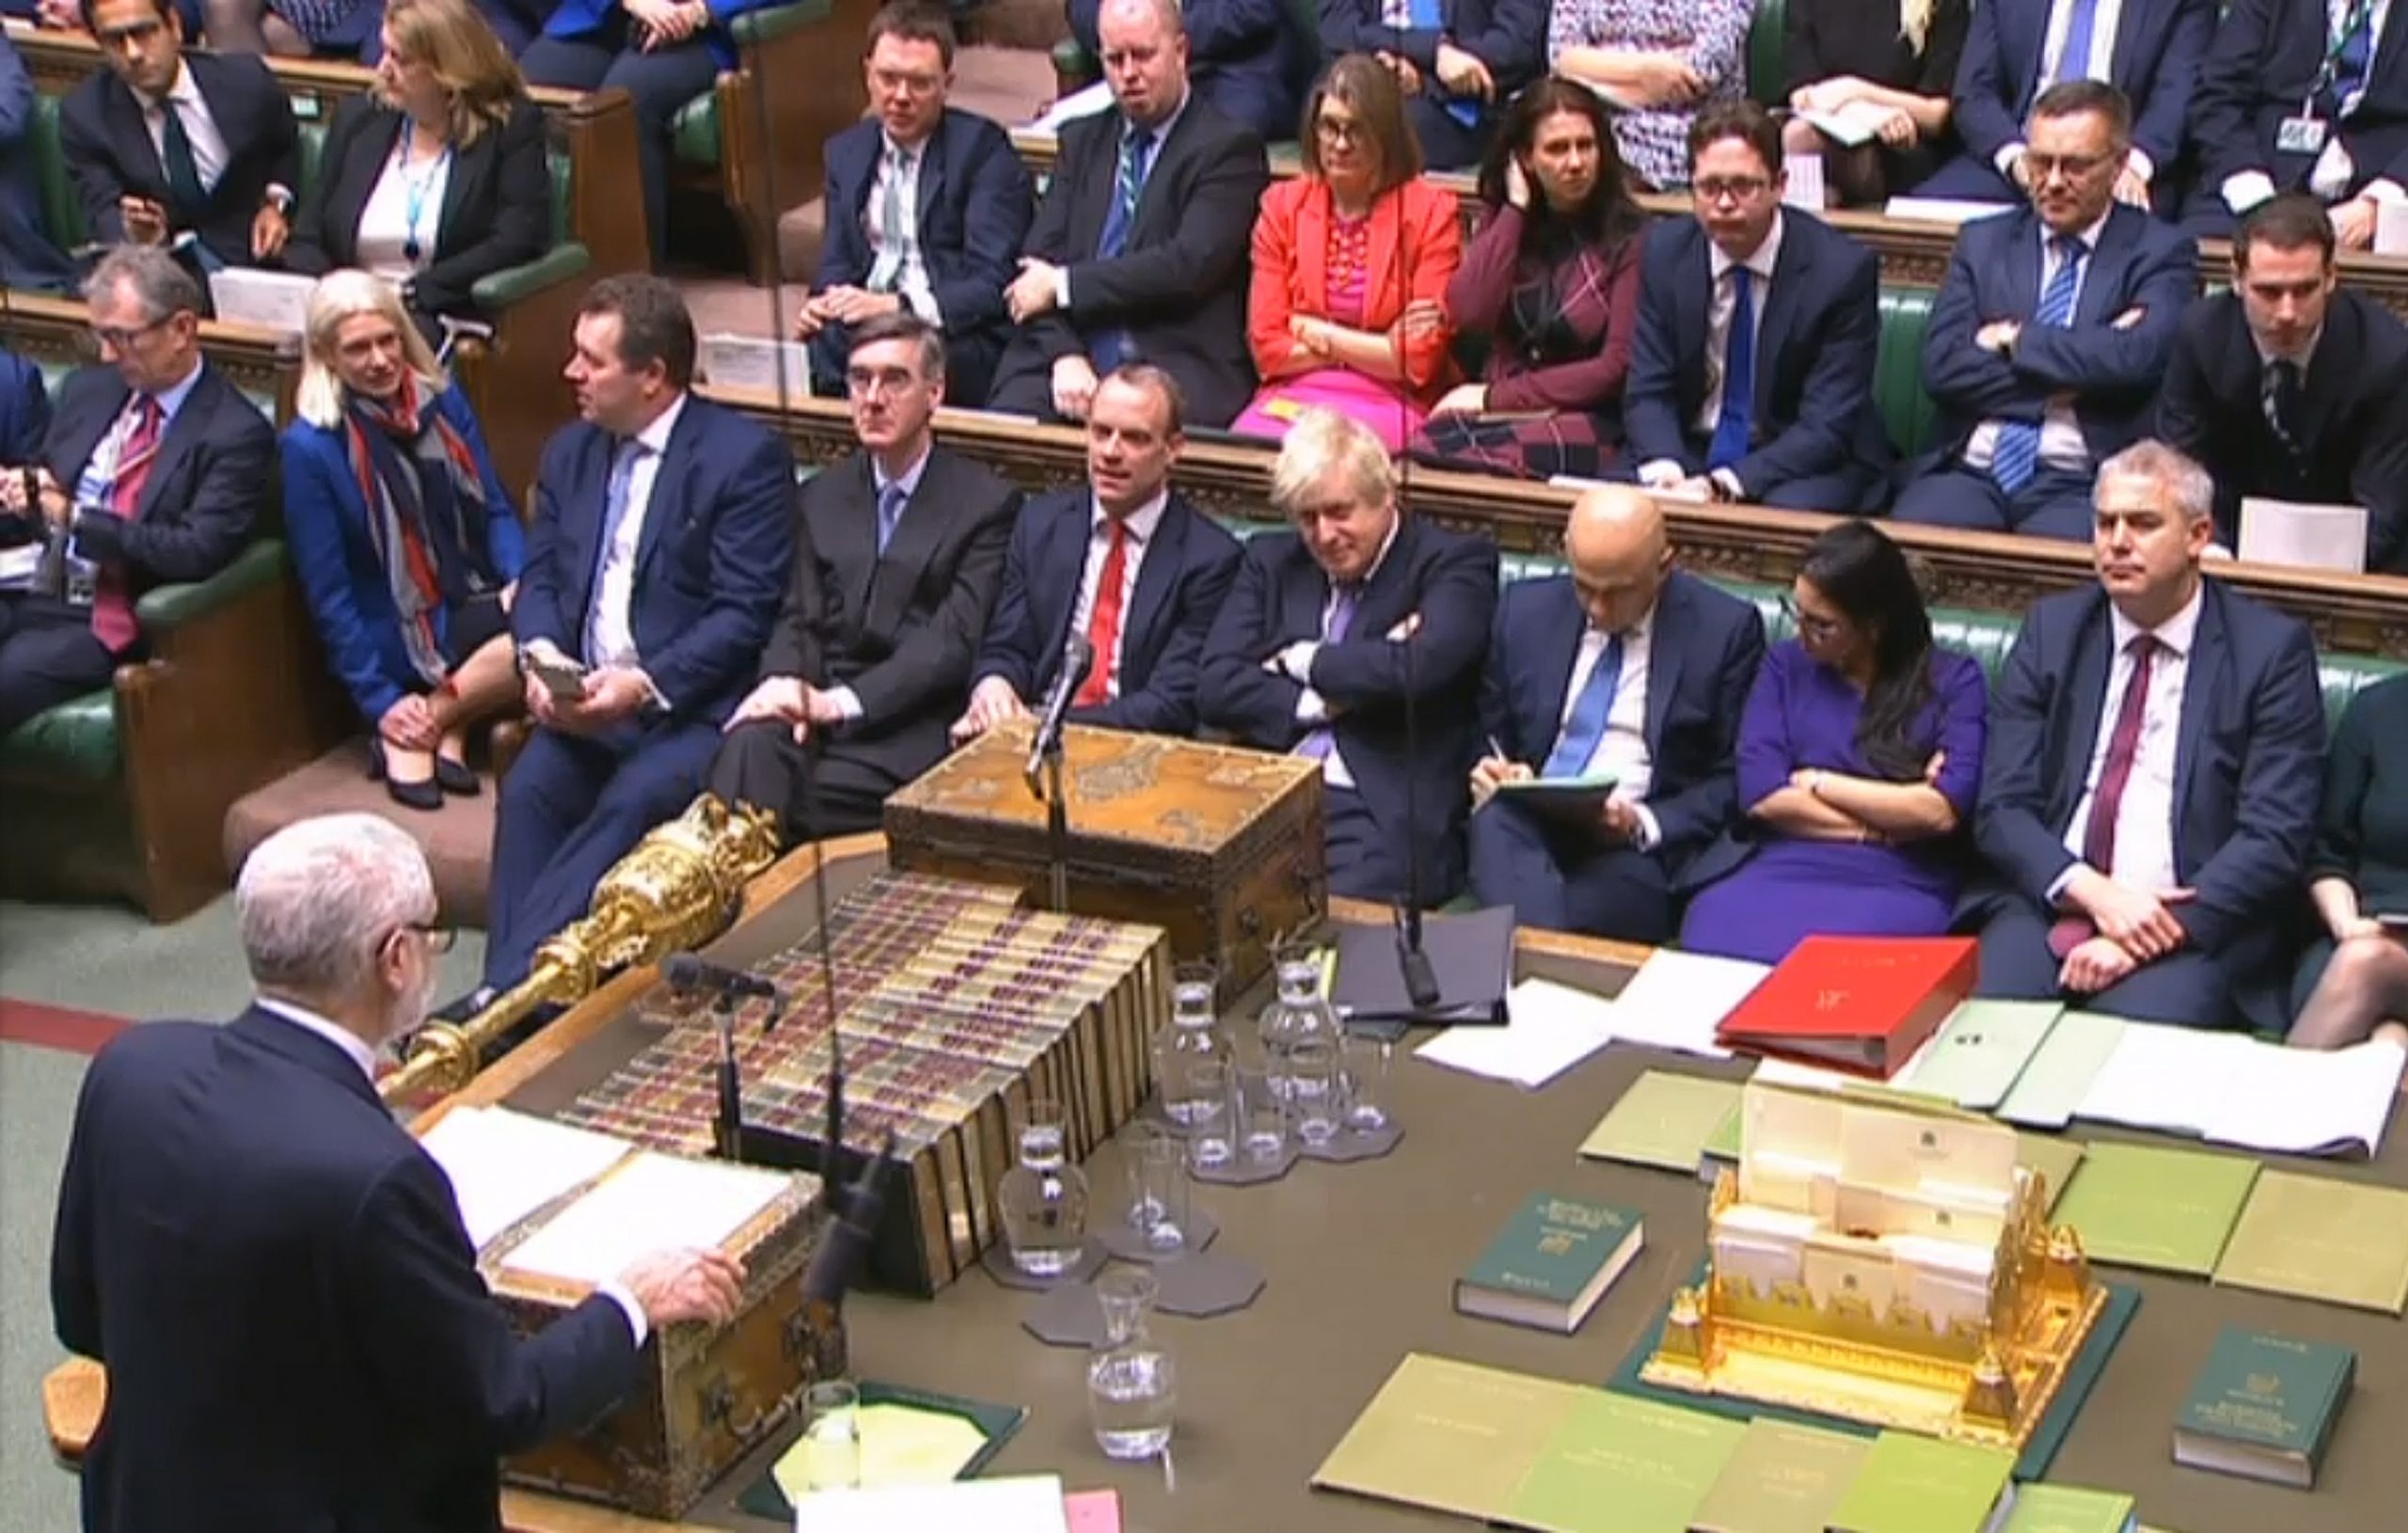 epa08083027 A grab from a handout video made available by the UK Parliamentary Recording Unit shows Labour party leader Jeremy Corbyn (bottom L) addressing MPs as British Prime Minister Boris Johnson (C) looks on at the House of Commons, in London, Britain, 20 December 2019. The MPs are due to vote later today on Prime Minister Johnson's plan for the United Kingdom to leave the EU on 31 January 2020.  EPA/UK PARLIAMENTARY RECORDING UNIT / HANDOUT MANDATORY CREDIT: UK PARLIAMENTARY RECORDING UNIT HANDOUT EDITORIAL USE ONLY/NO SALES